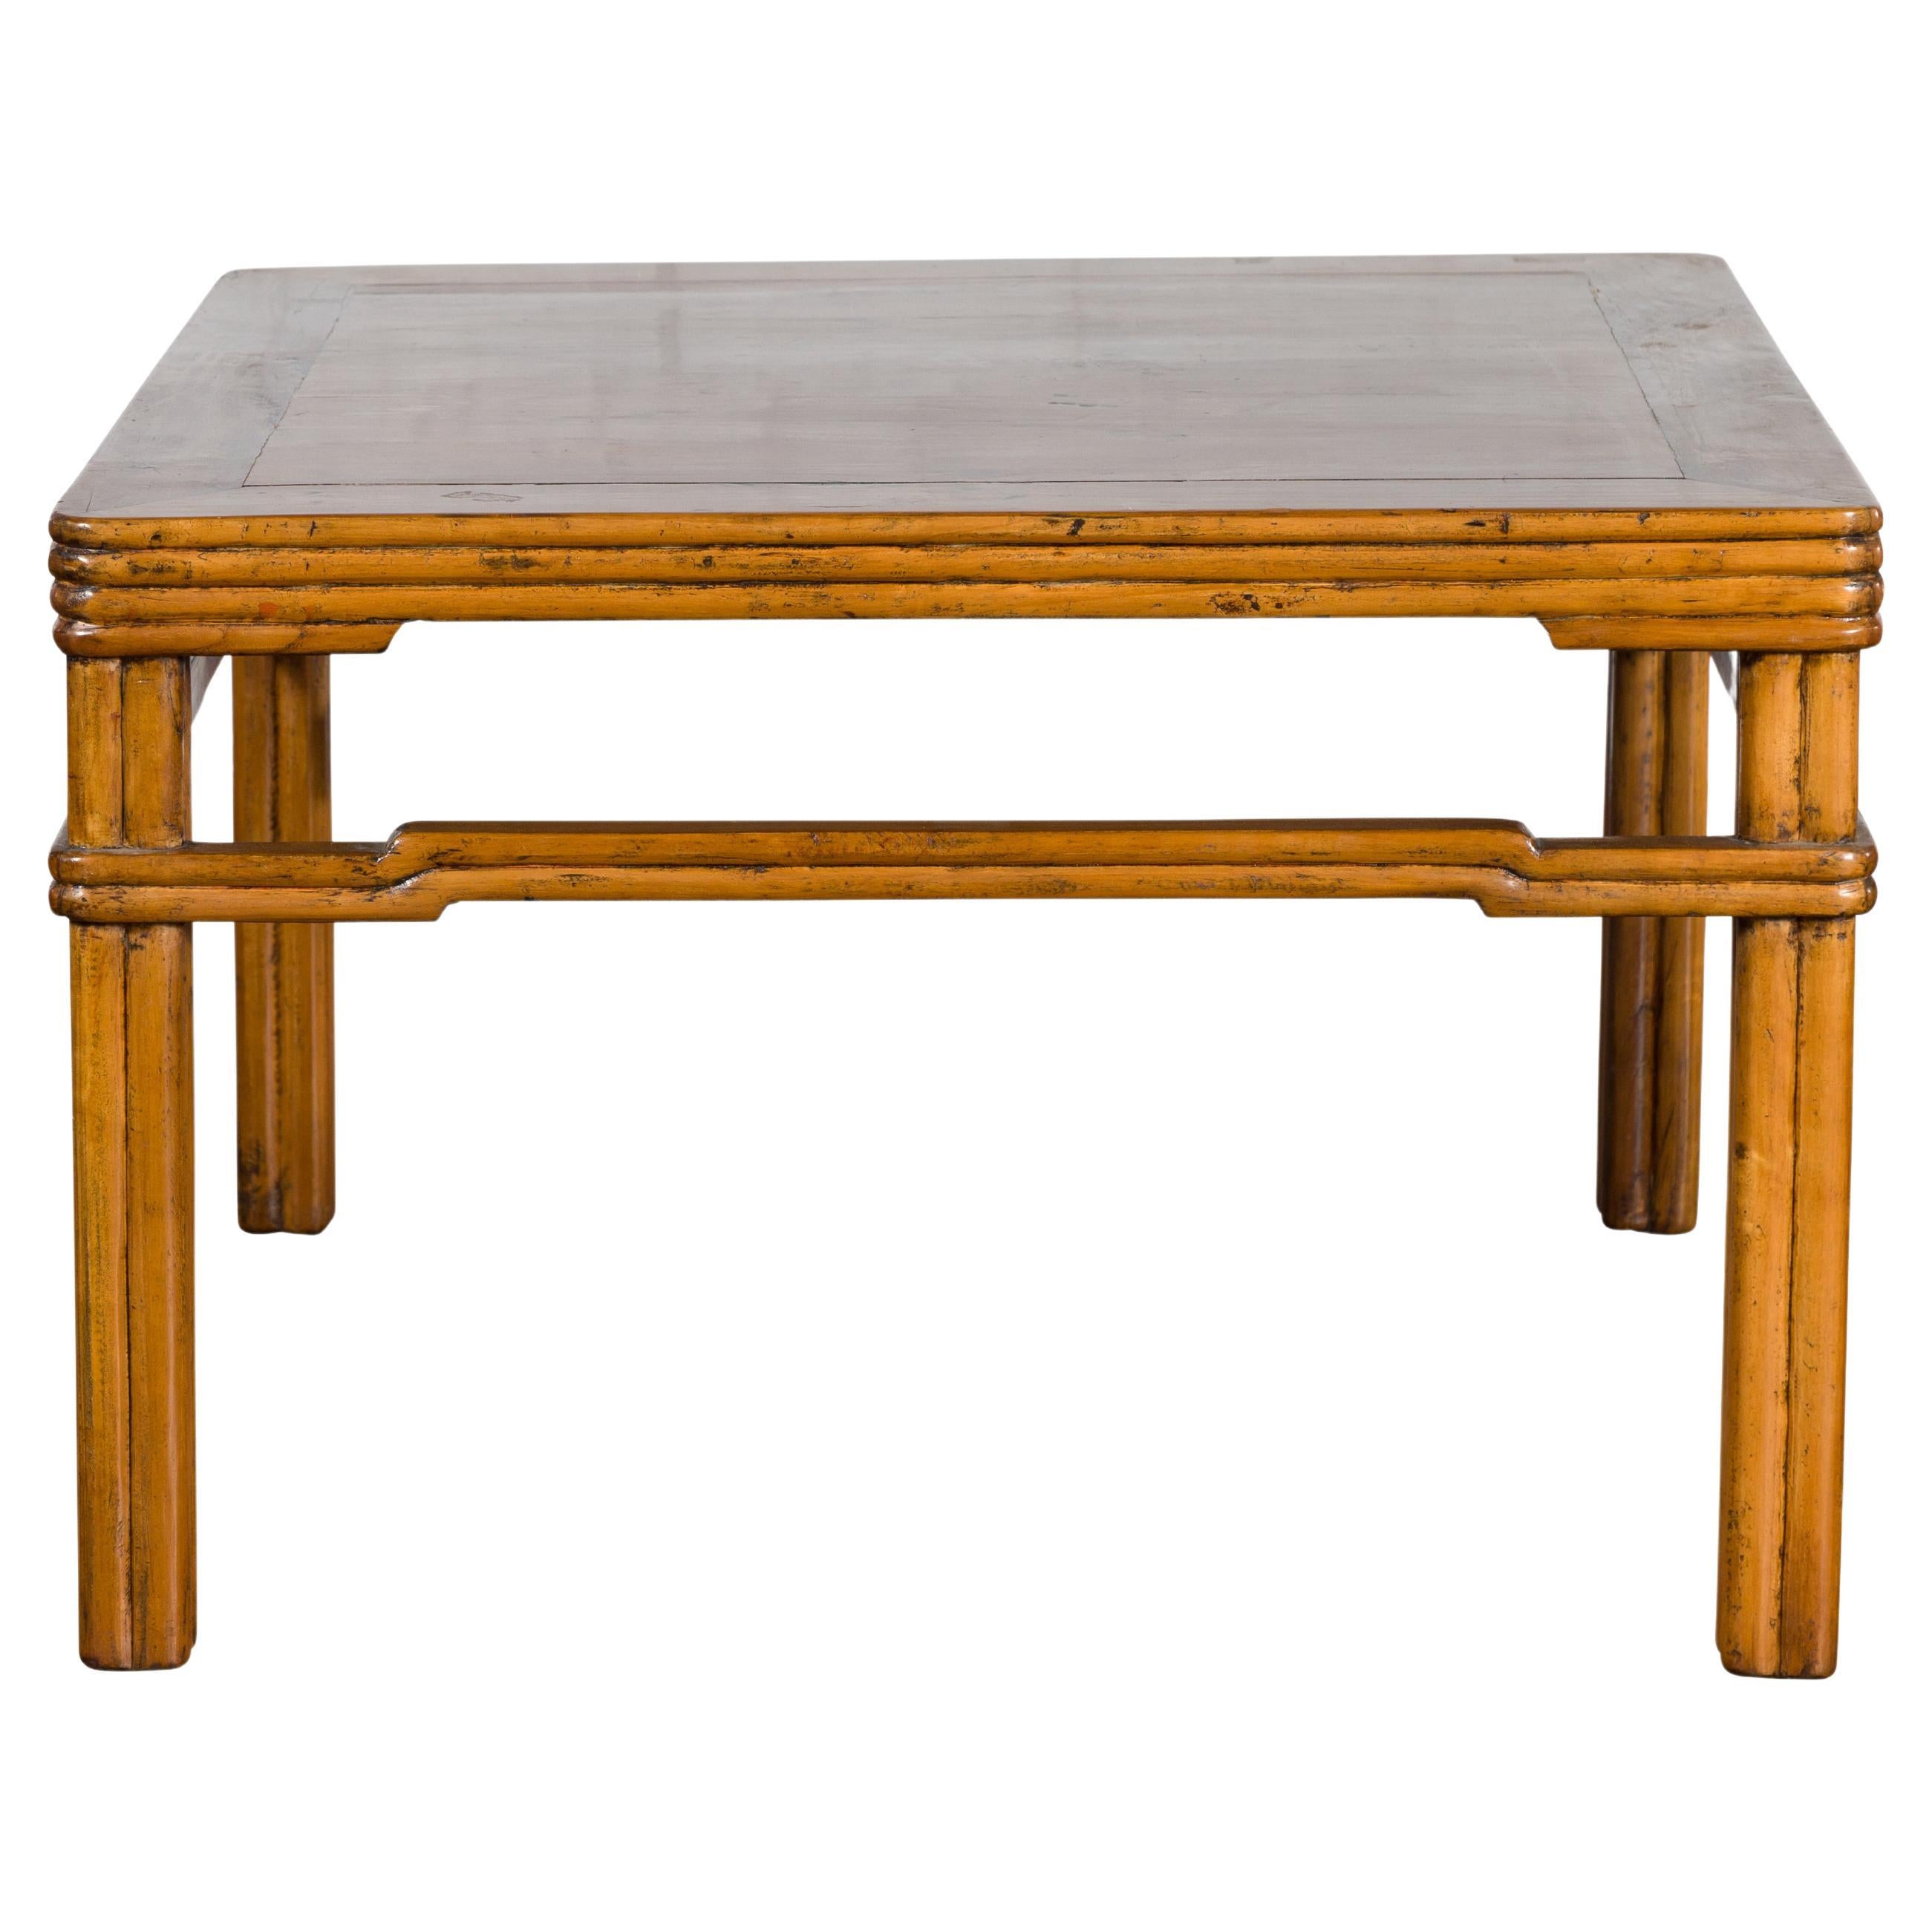 Chinese Early 20th Century Light Brown Low Side Table with Humpback Stretchers For Sale